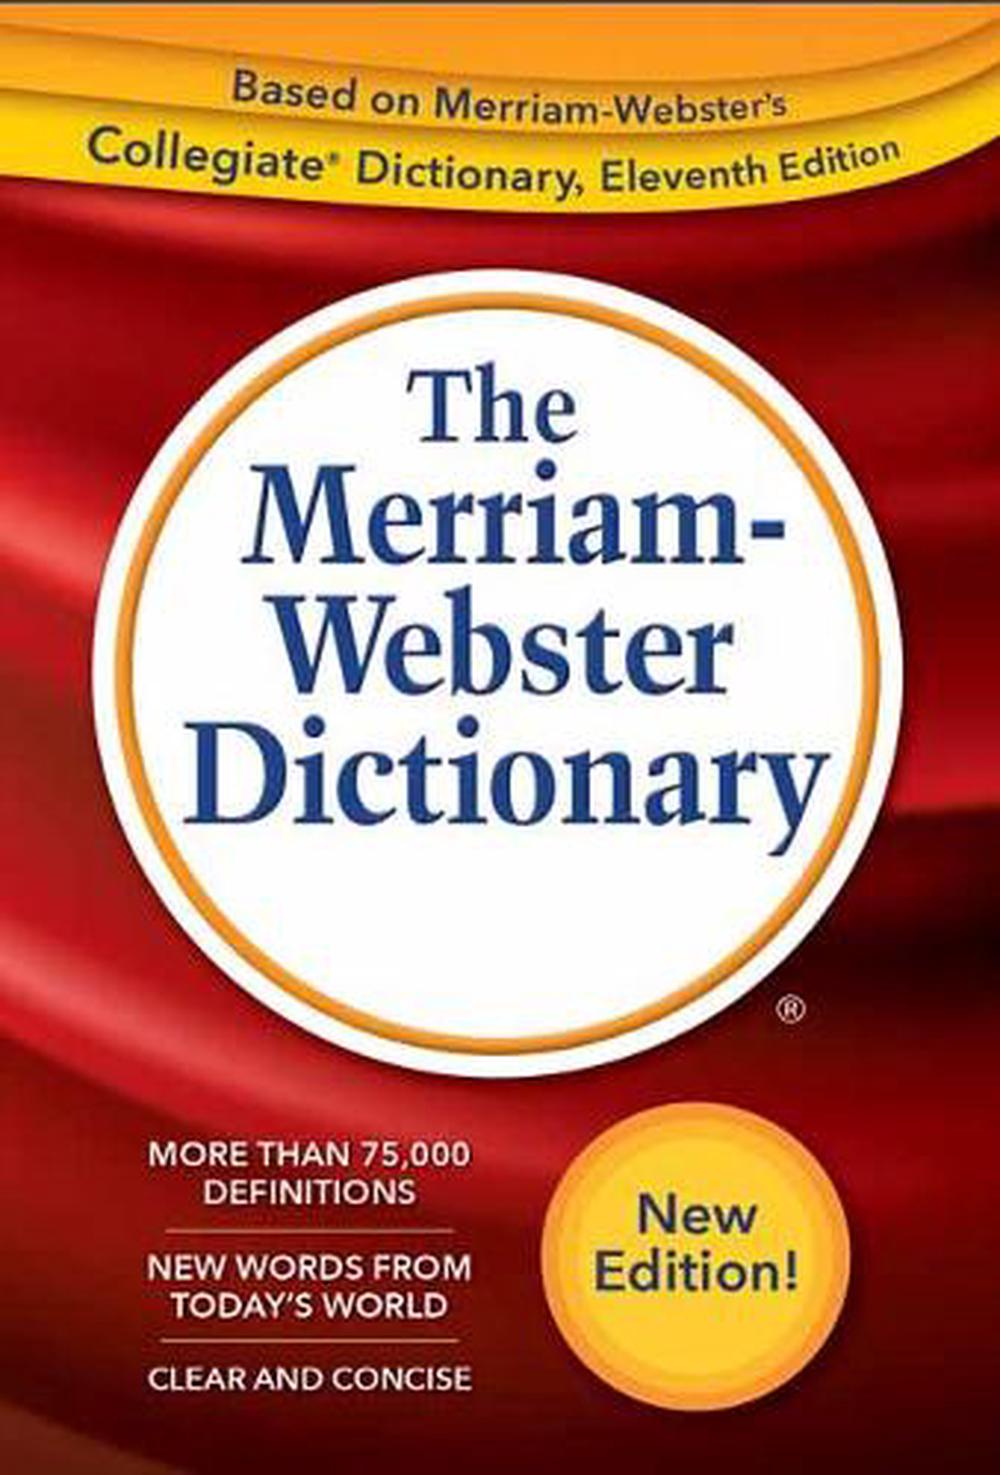 Merriam Webster Dictionary By Merriam Webster Free Shipping 9780877796688 Ebay 5156